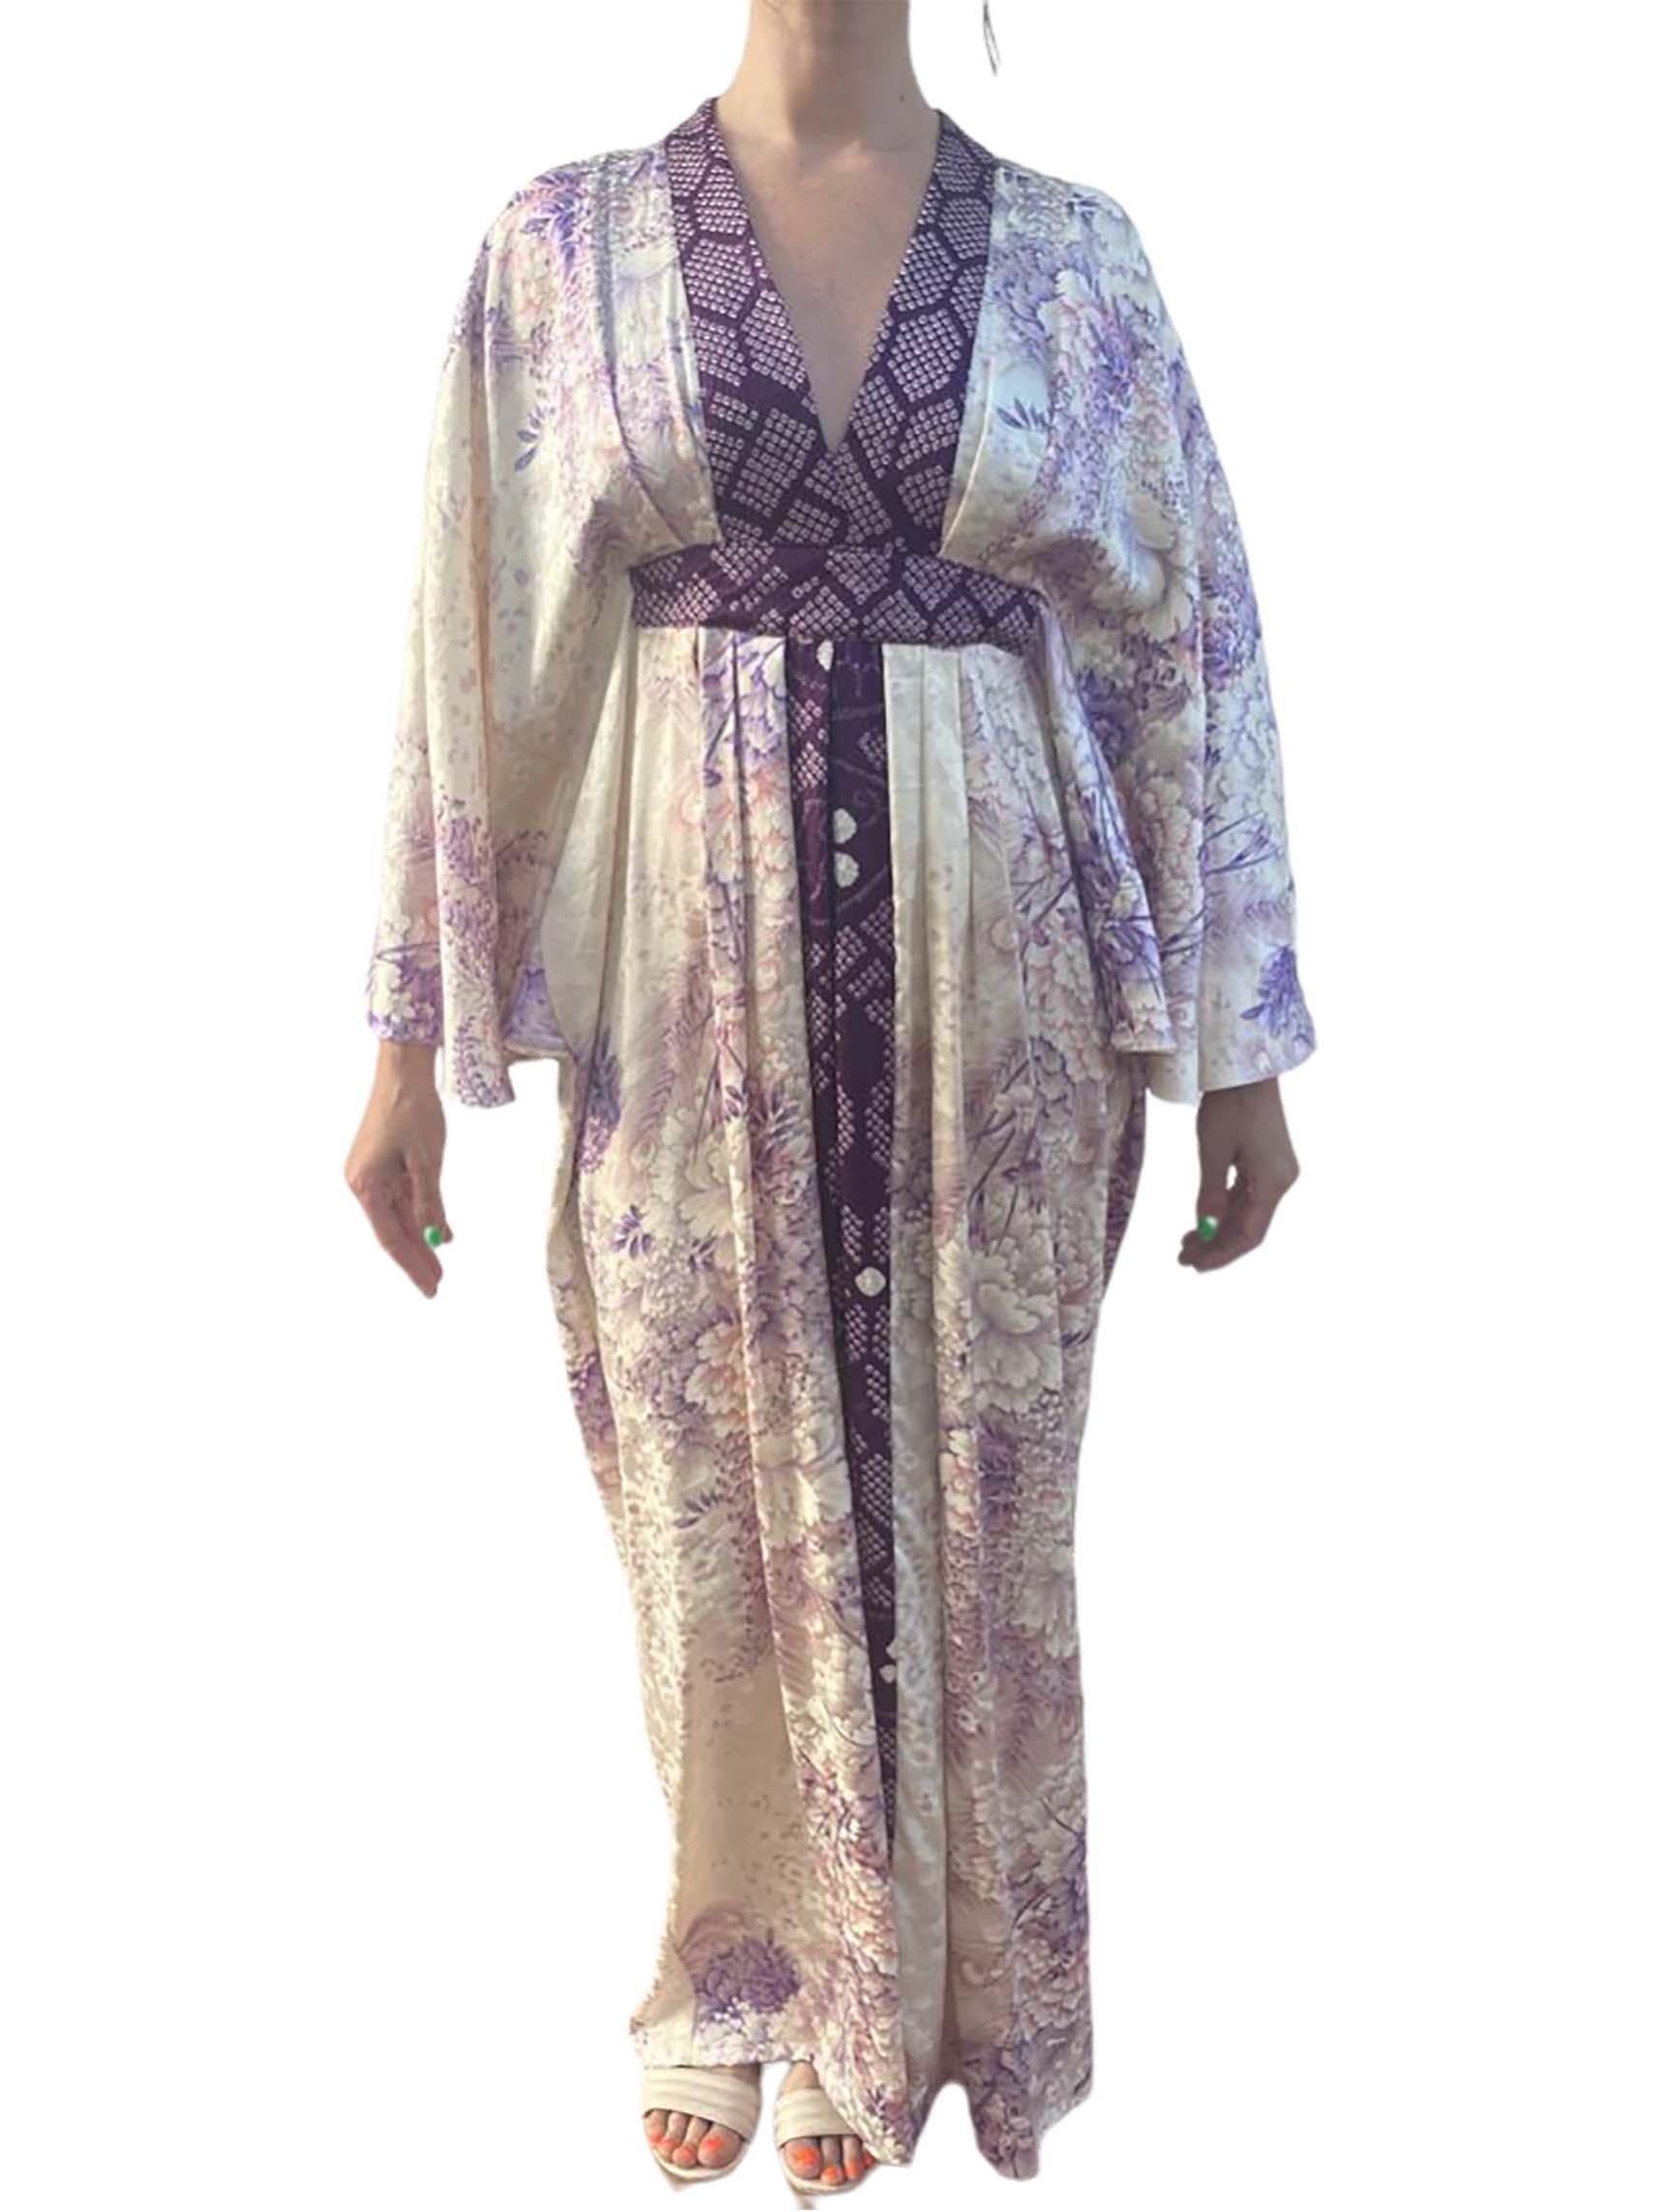 Each Morphew Collection kaftan is unique. Using our classic fitted/unfitted kaftan pattern we upcycle vintage kimono silks from the 1940s to the 1980s. Many are hand printed or dyed and some even have touches of hand embroidery or touches of